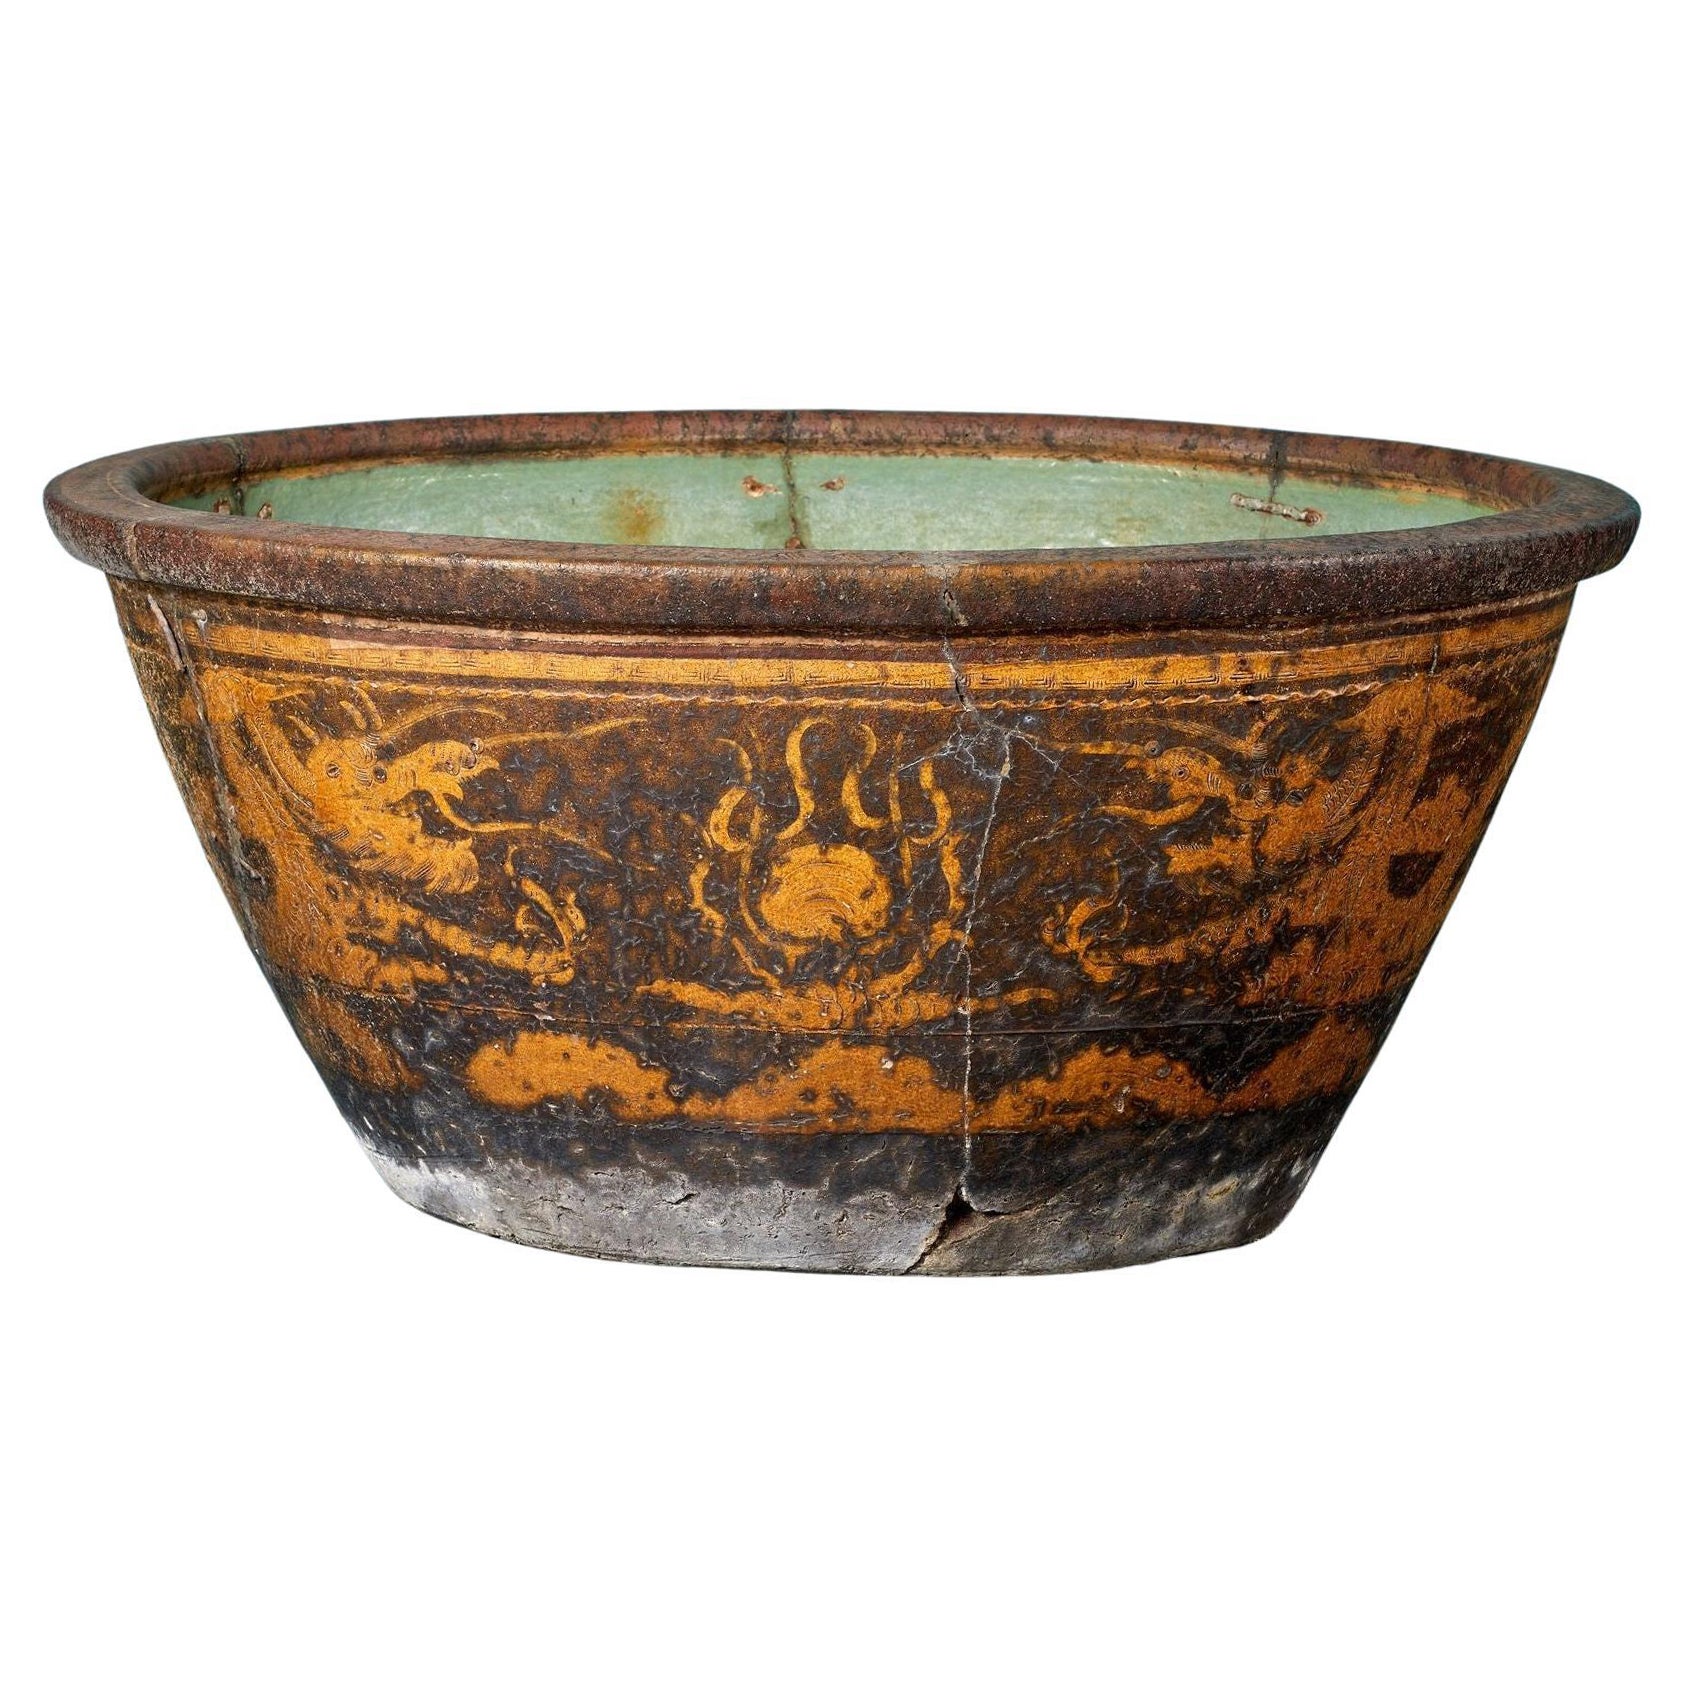 Antique Chinese Oval Fish Bowl Planter For Sale